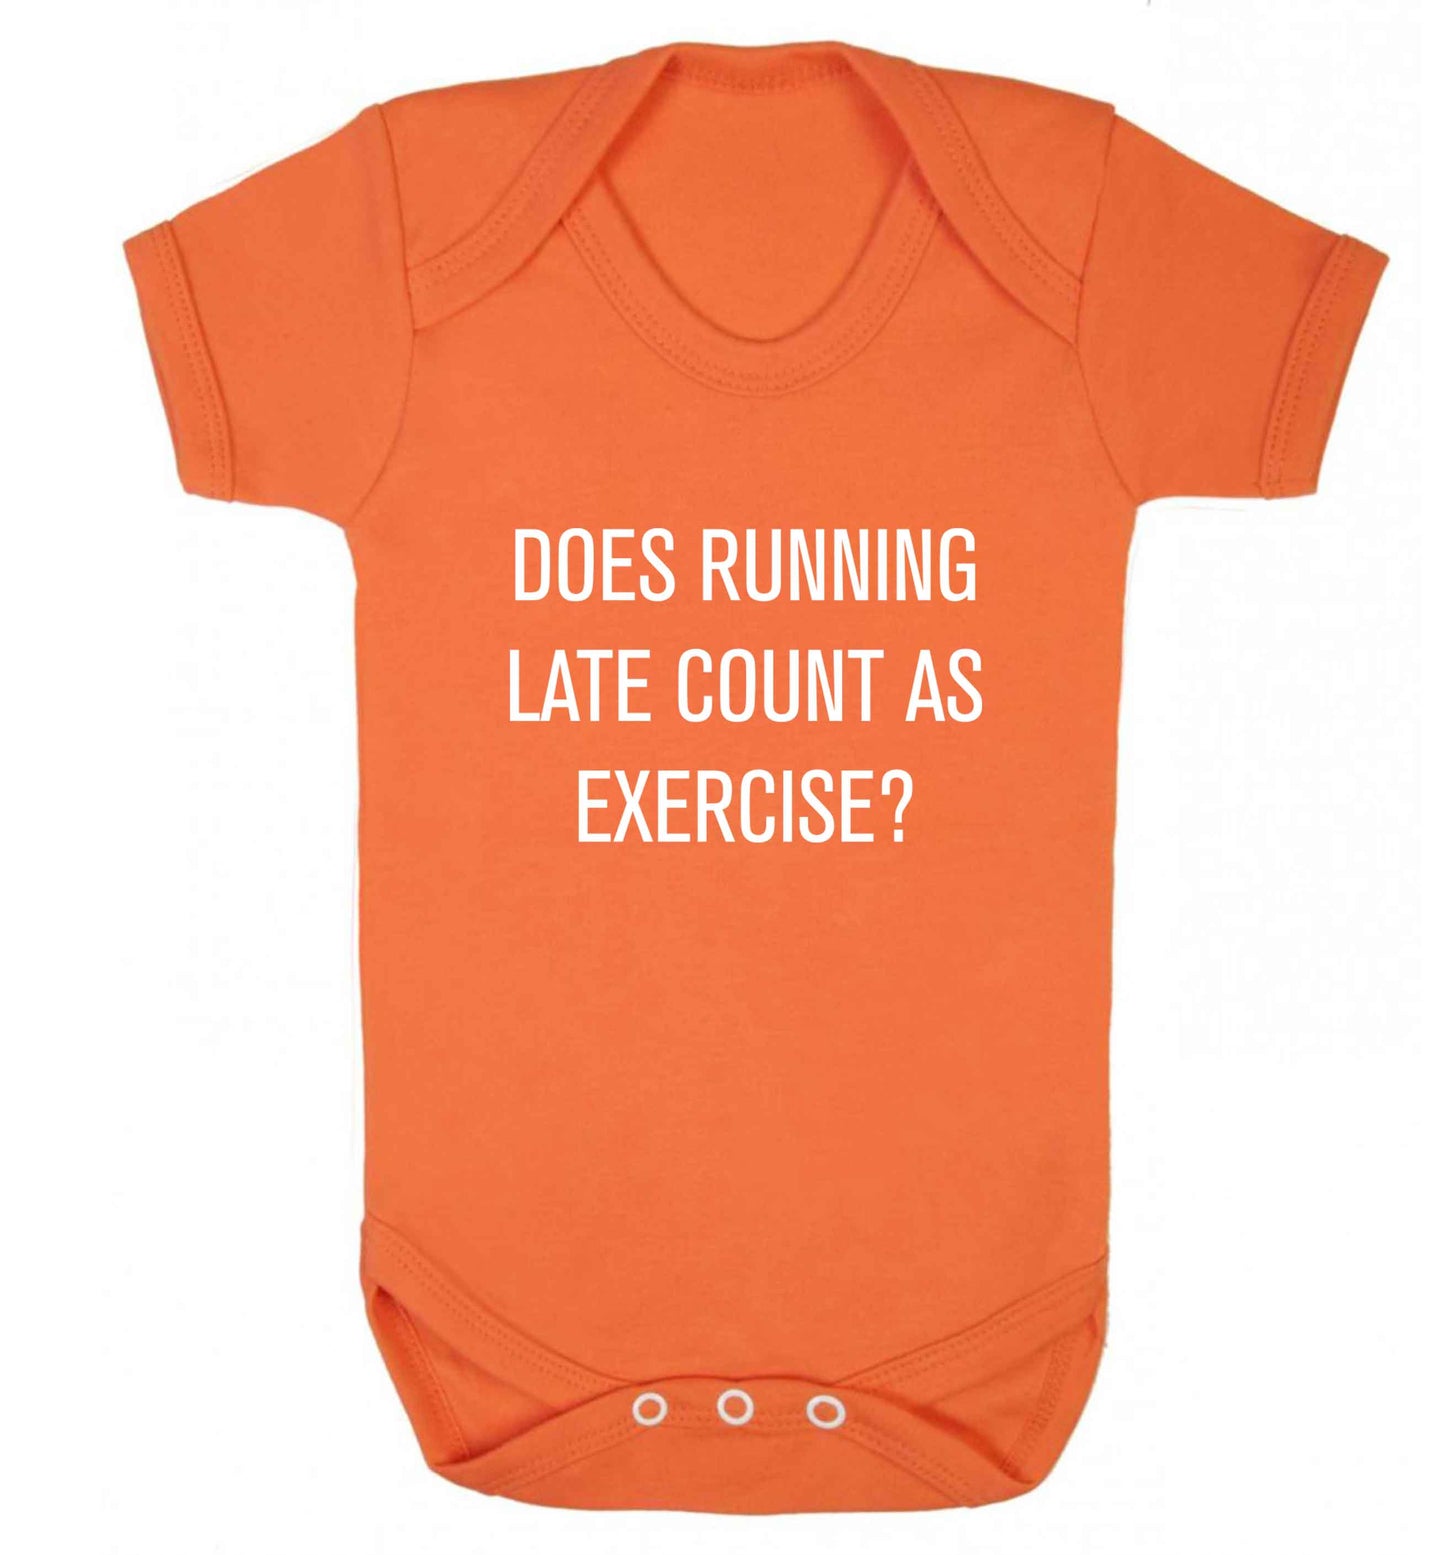 Does running late count as exercise? baby vest orange 18-24 months